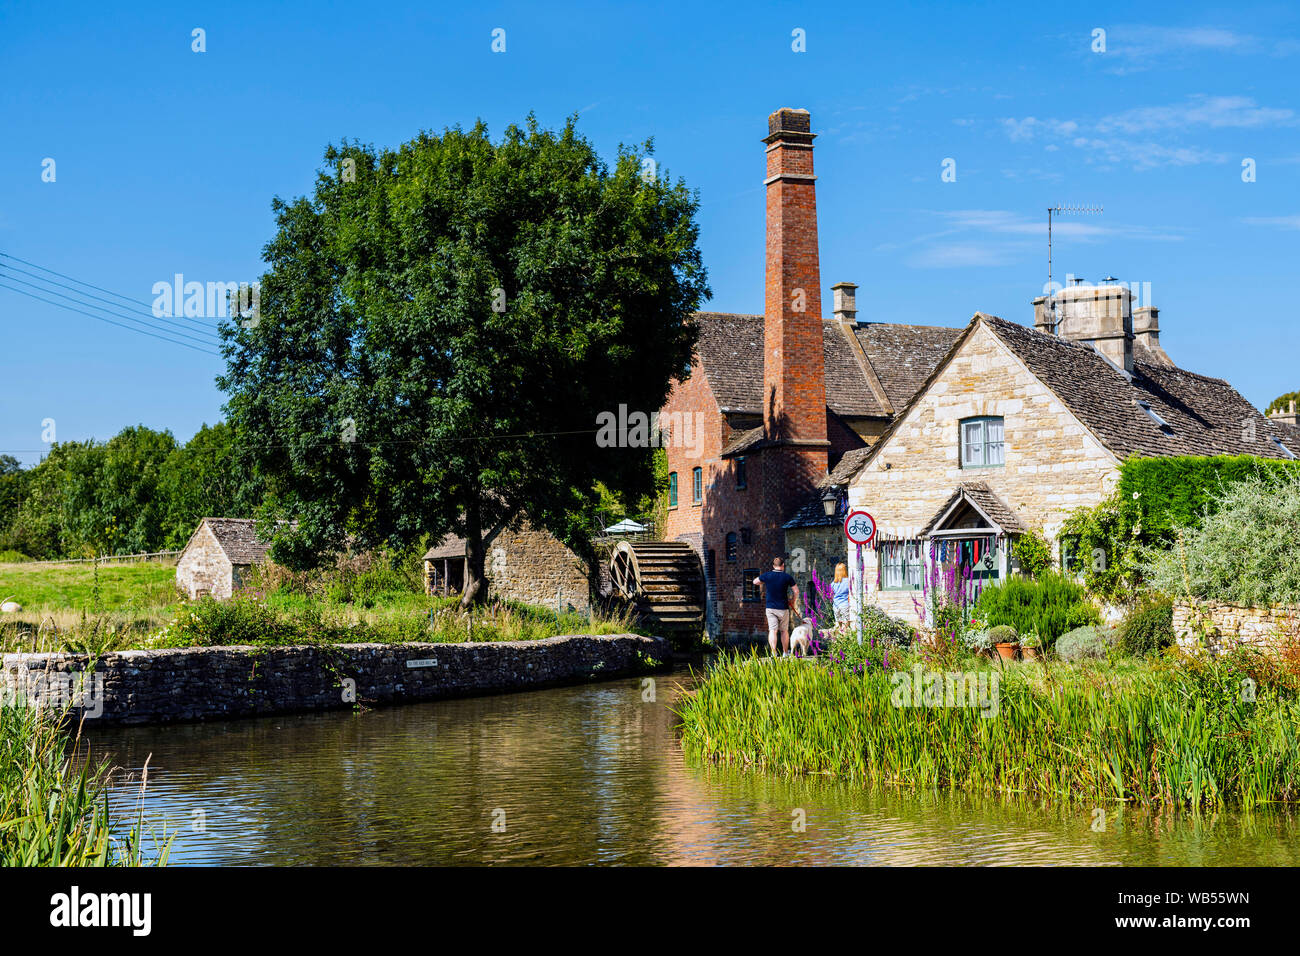 Lower Slaughter Mill, Cotswolds, Royaume-Uni. Banque D'Images